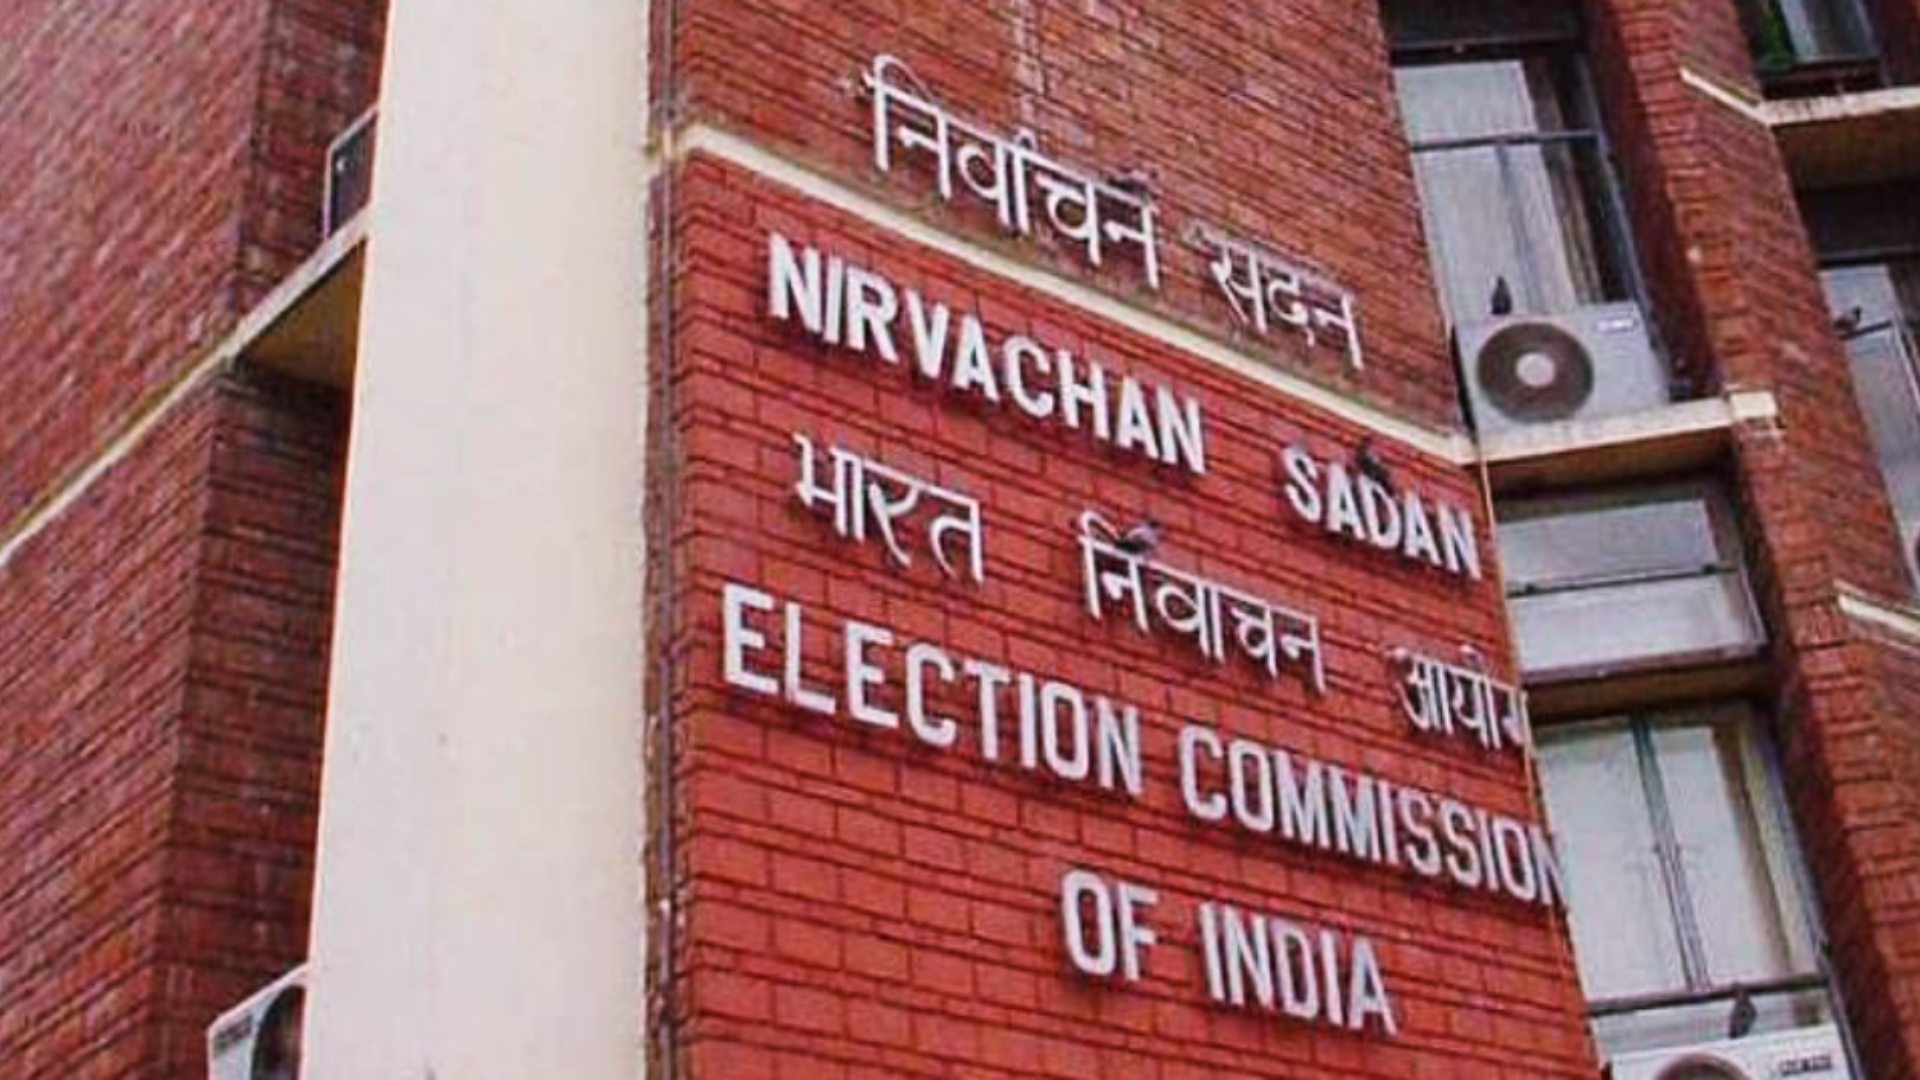 Phase 2 Witnessed Peacefully: Election Commission Of India On Phase 2